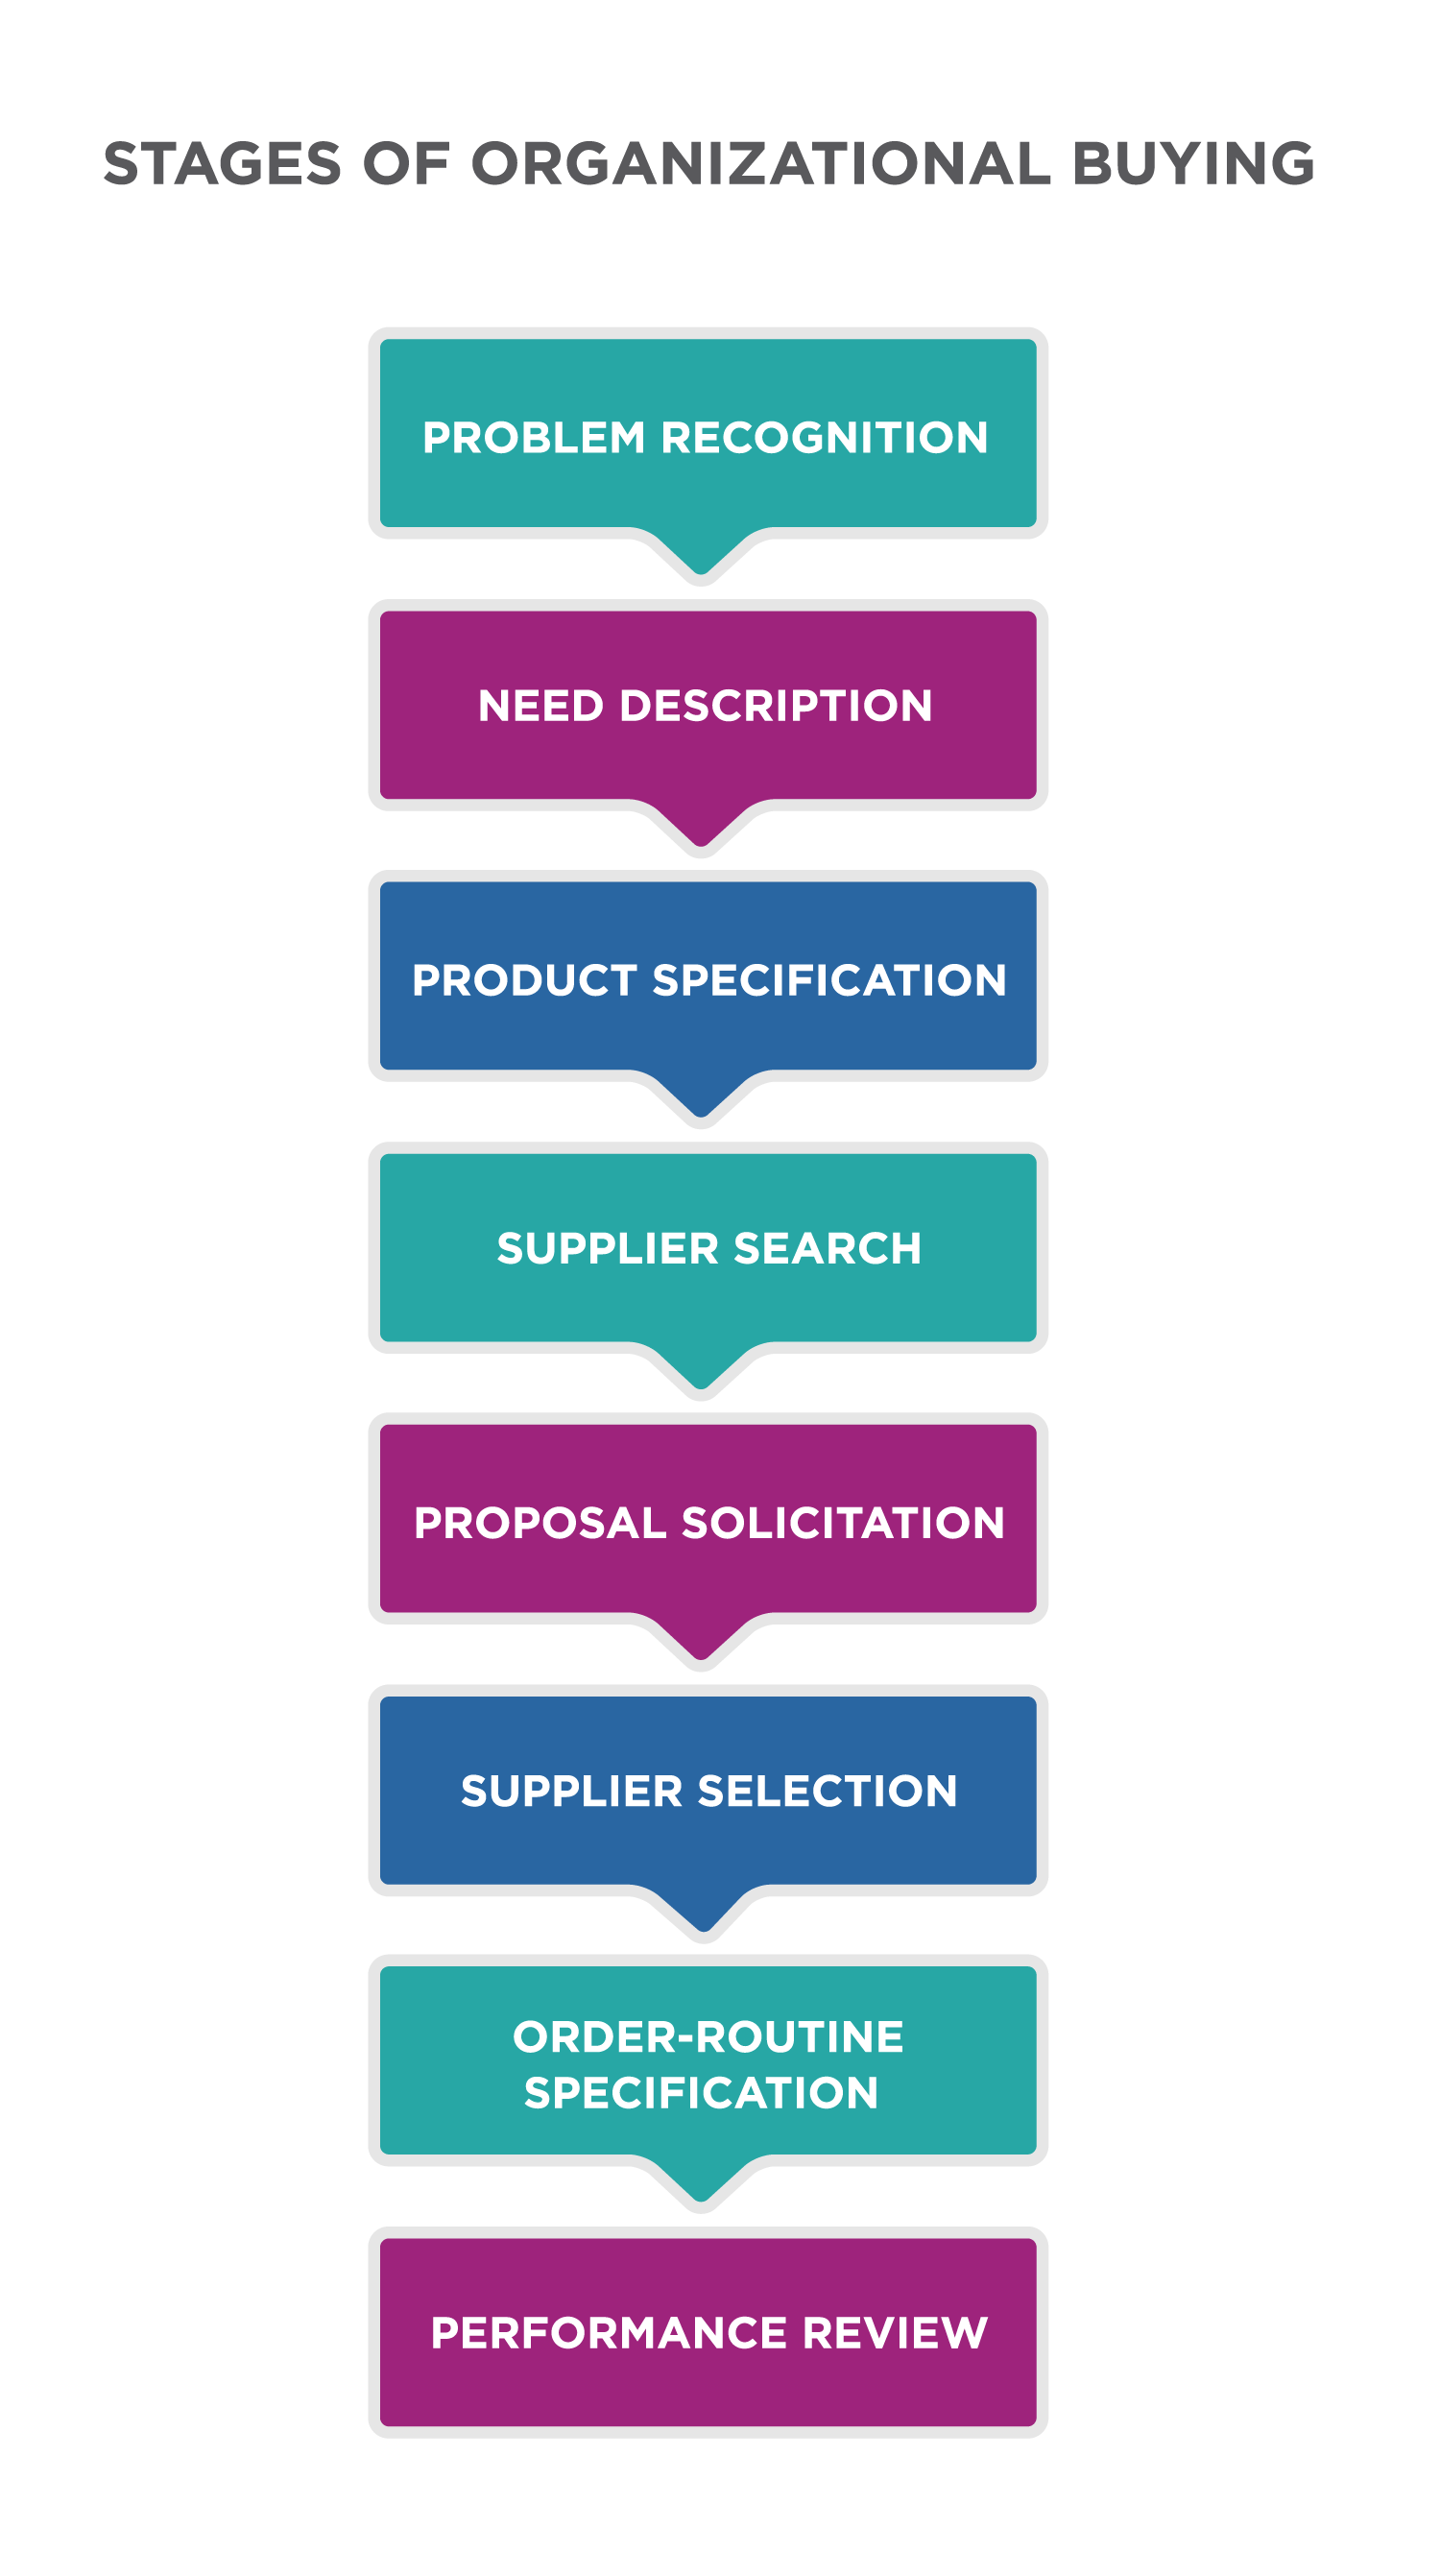 Stages of Organizational Buying. Problem recognition, need description, product specification, supplier search, proposal solicitation, supplier selection, order-routine specification, performance review